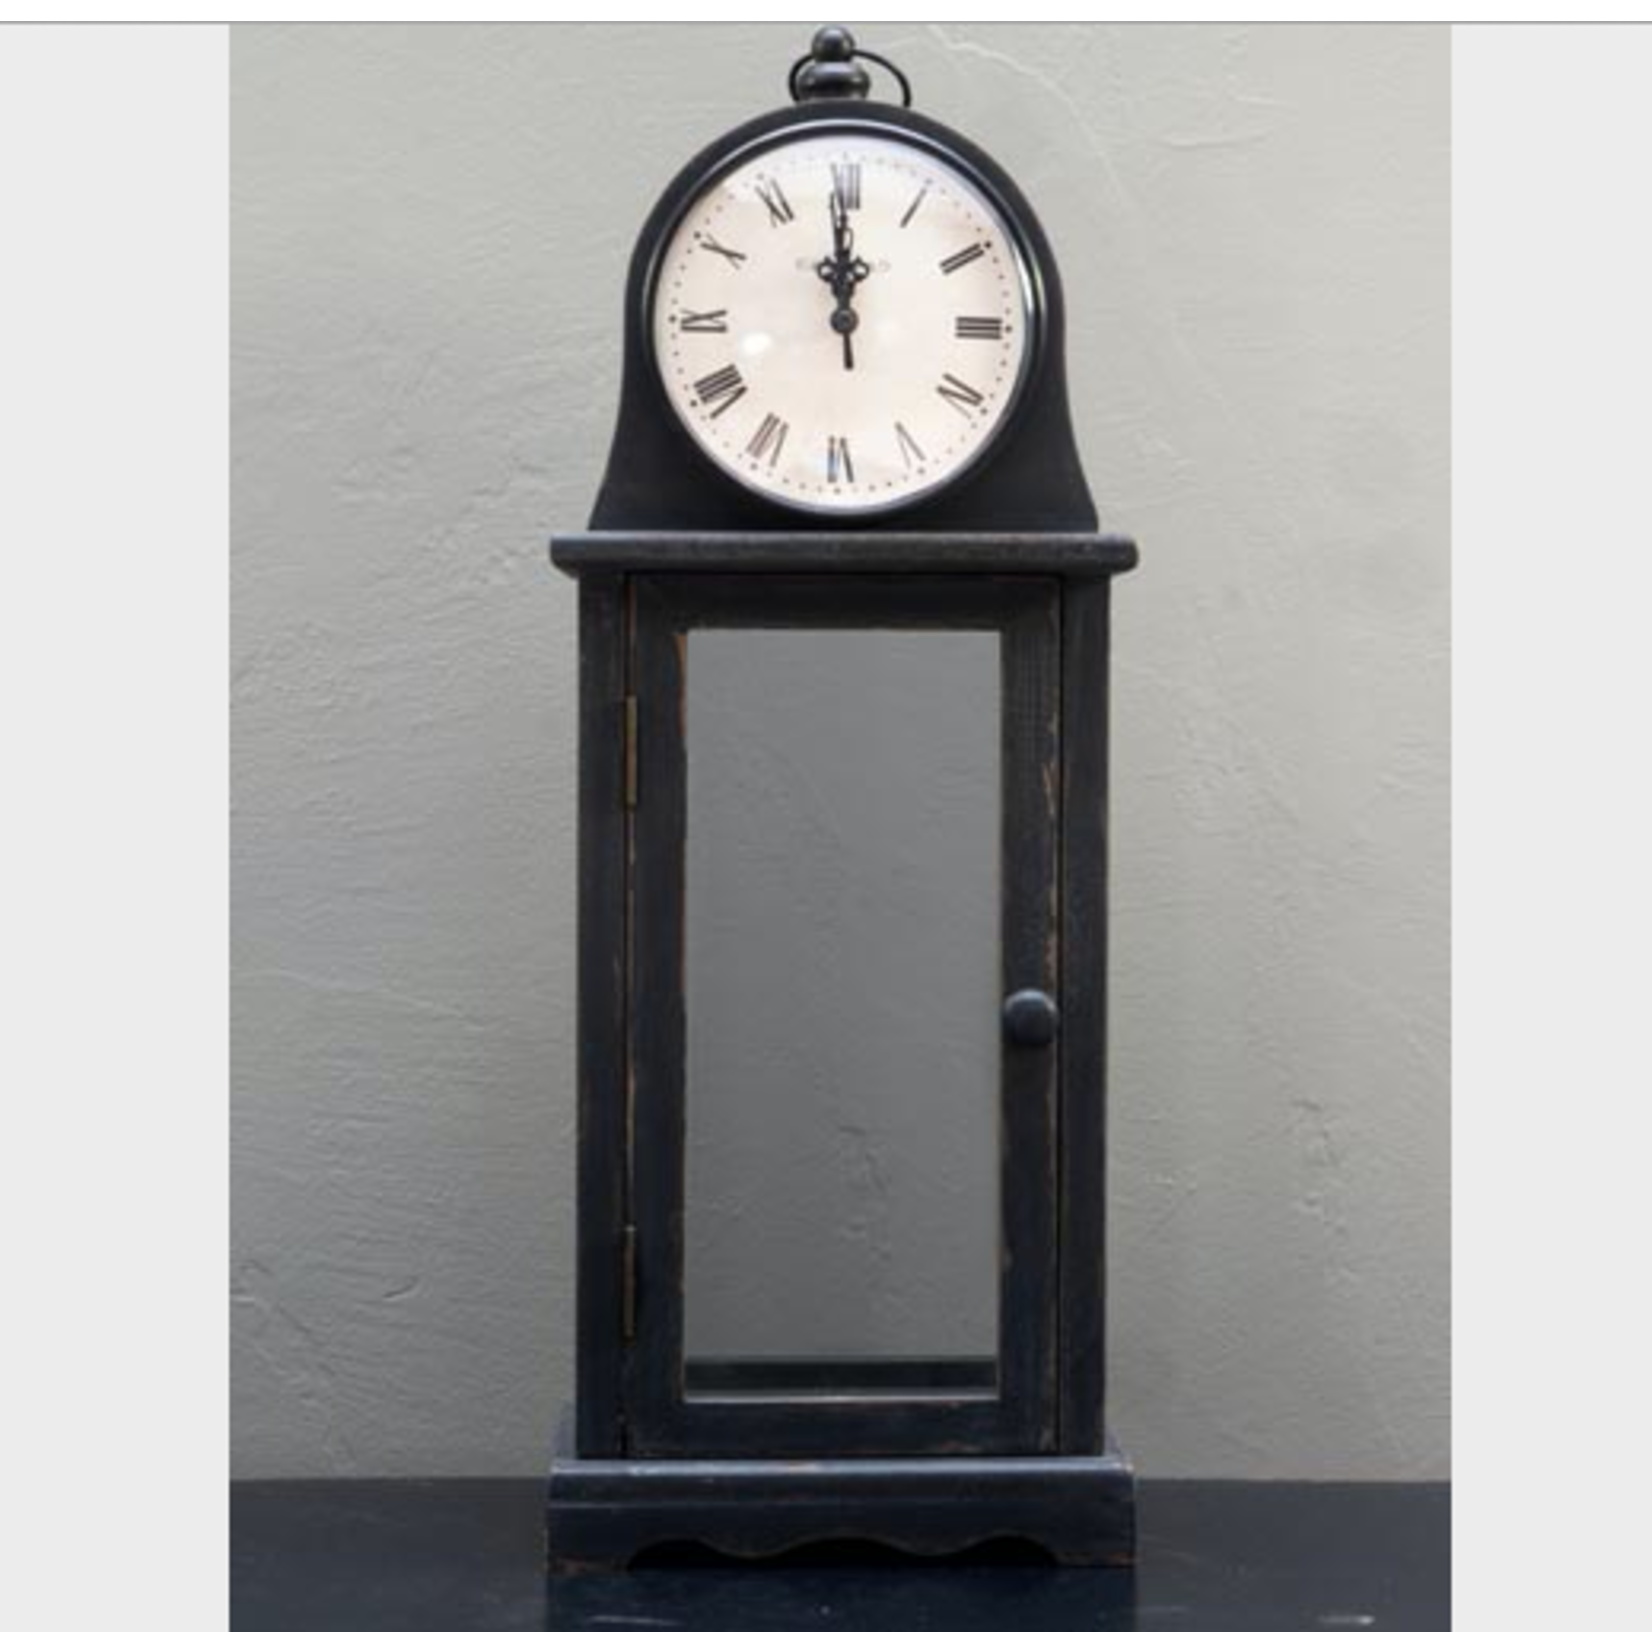 CHEHOMA SMALL CLOCK ON STAND WITH DISPLAY